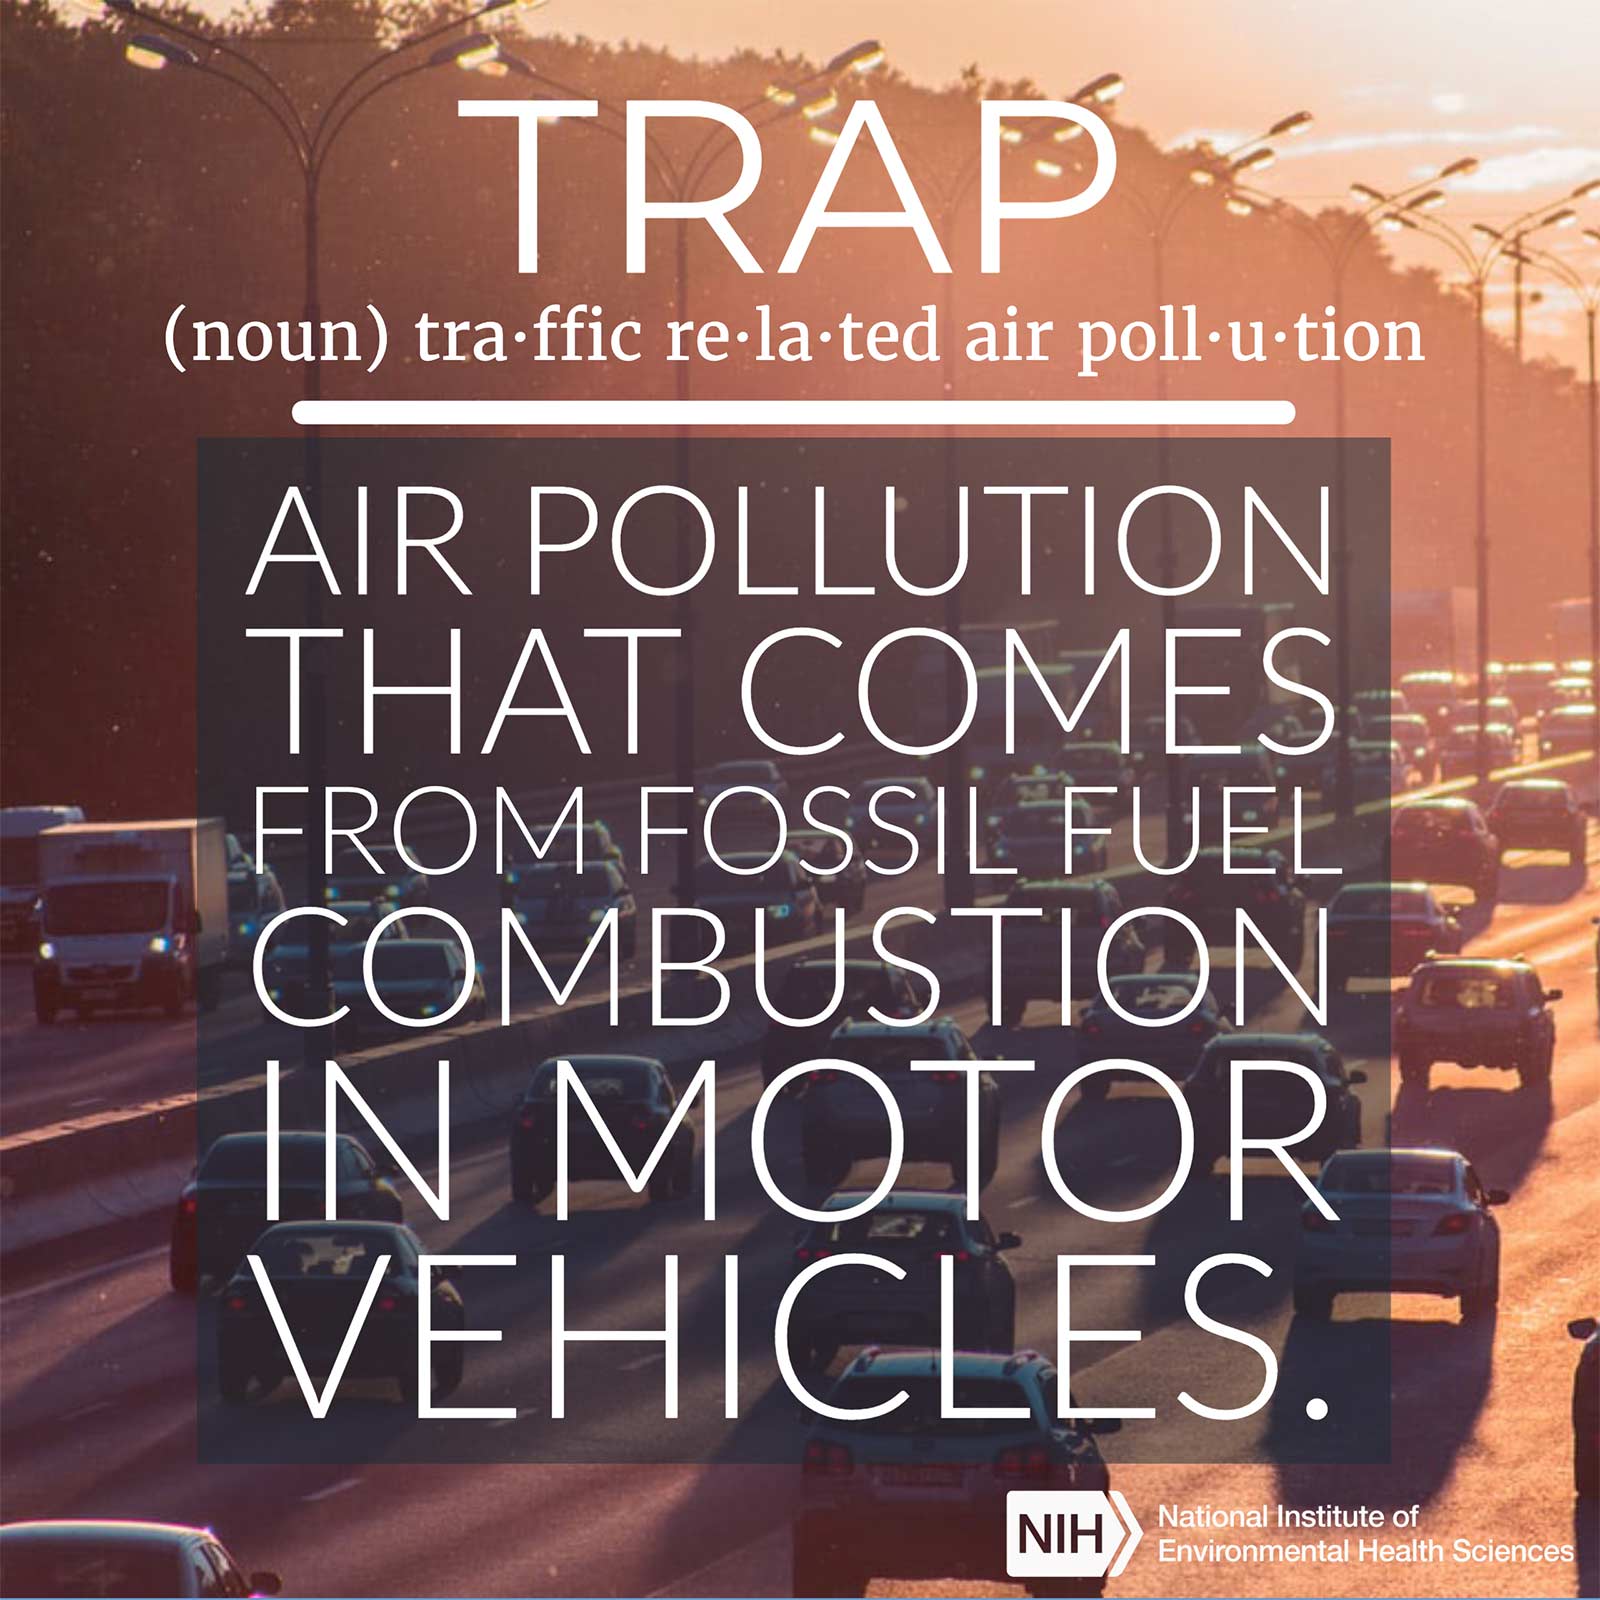 TRAP (noun) traffic related air pollution defined as 'Air pollution that comes from fossil fuel combustion in motor vehicles.'